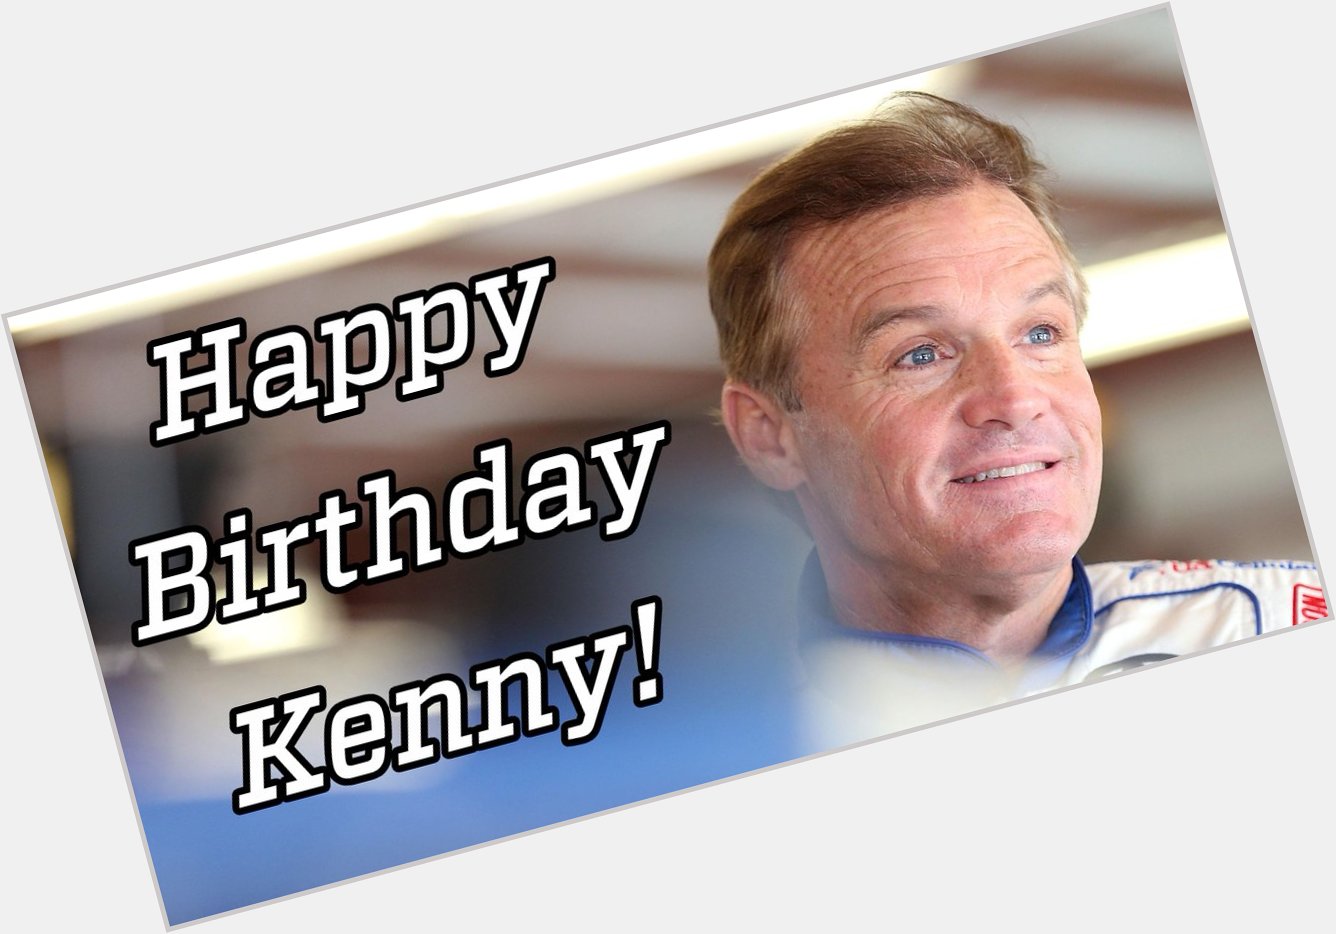 Let\s all wish a Happy Birthday!

Herm won $538,647 at Chicagoland in his career! You\re welcome 